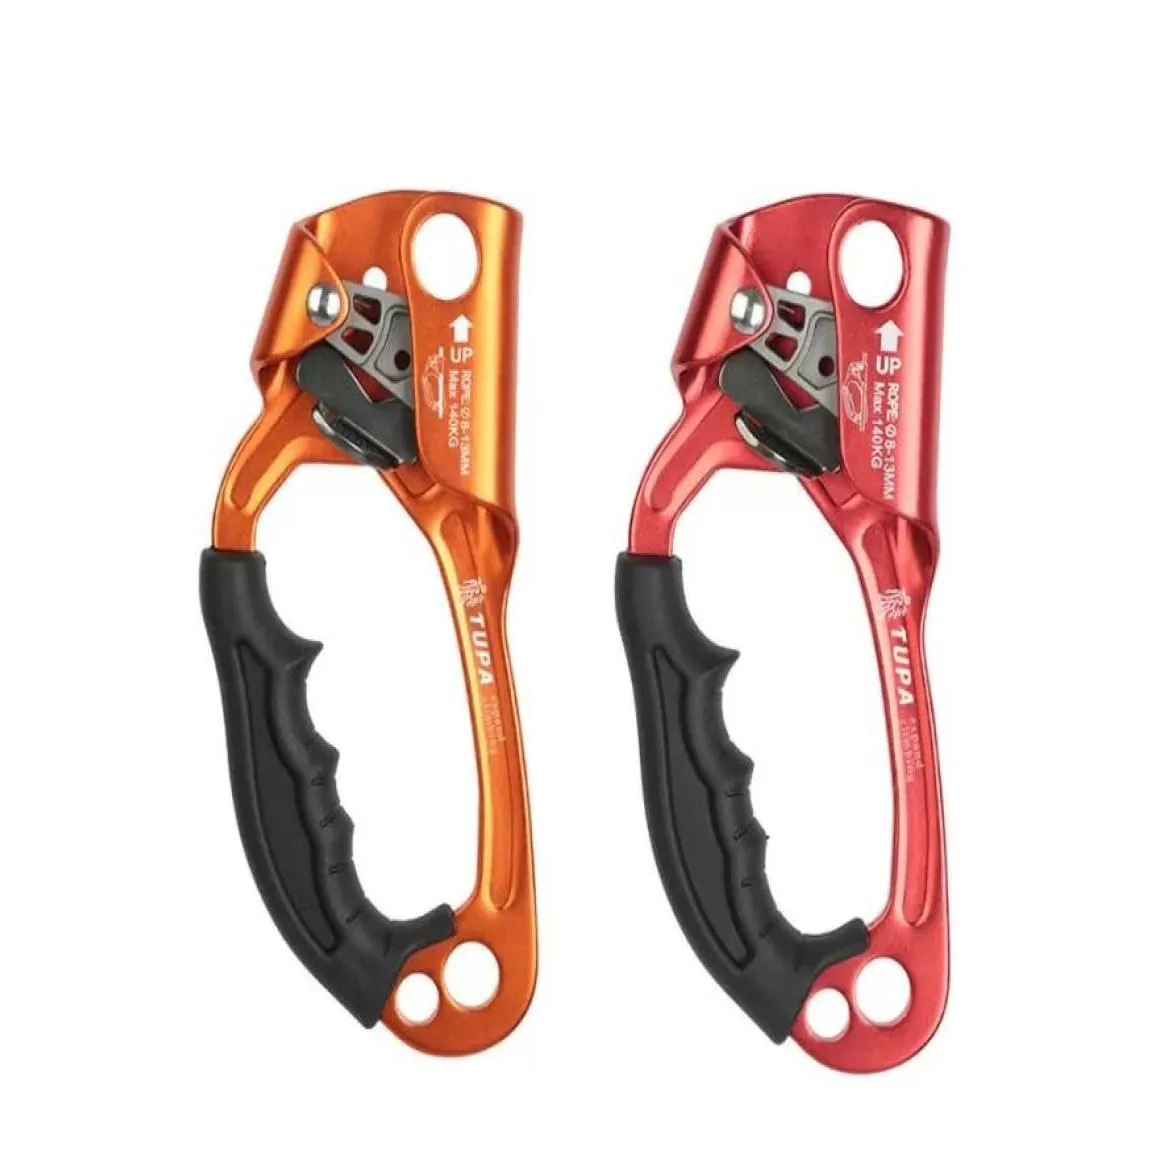 outdoor gadgets professional arborist rock climbing equipment carabiner mountaineer right hand climbing ascender cave rope